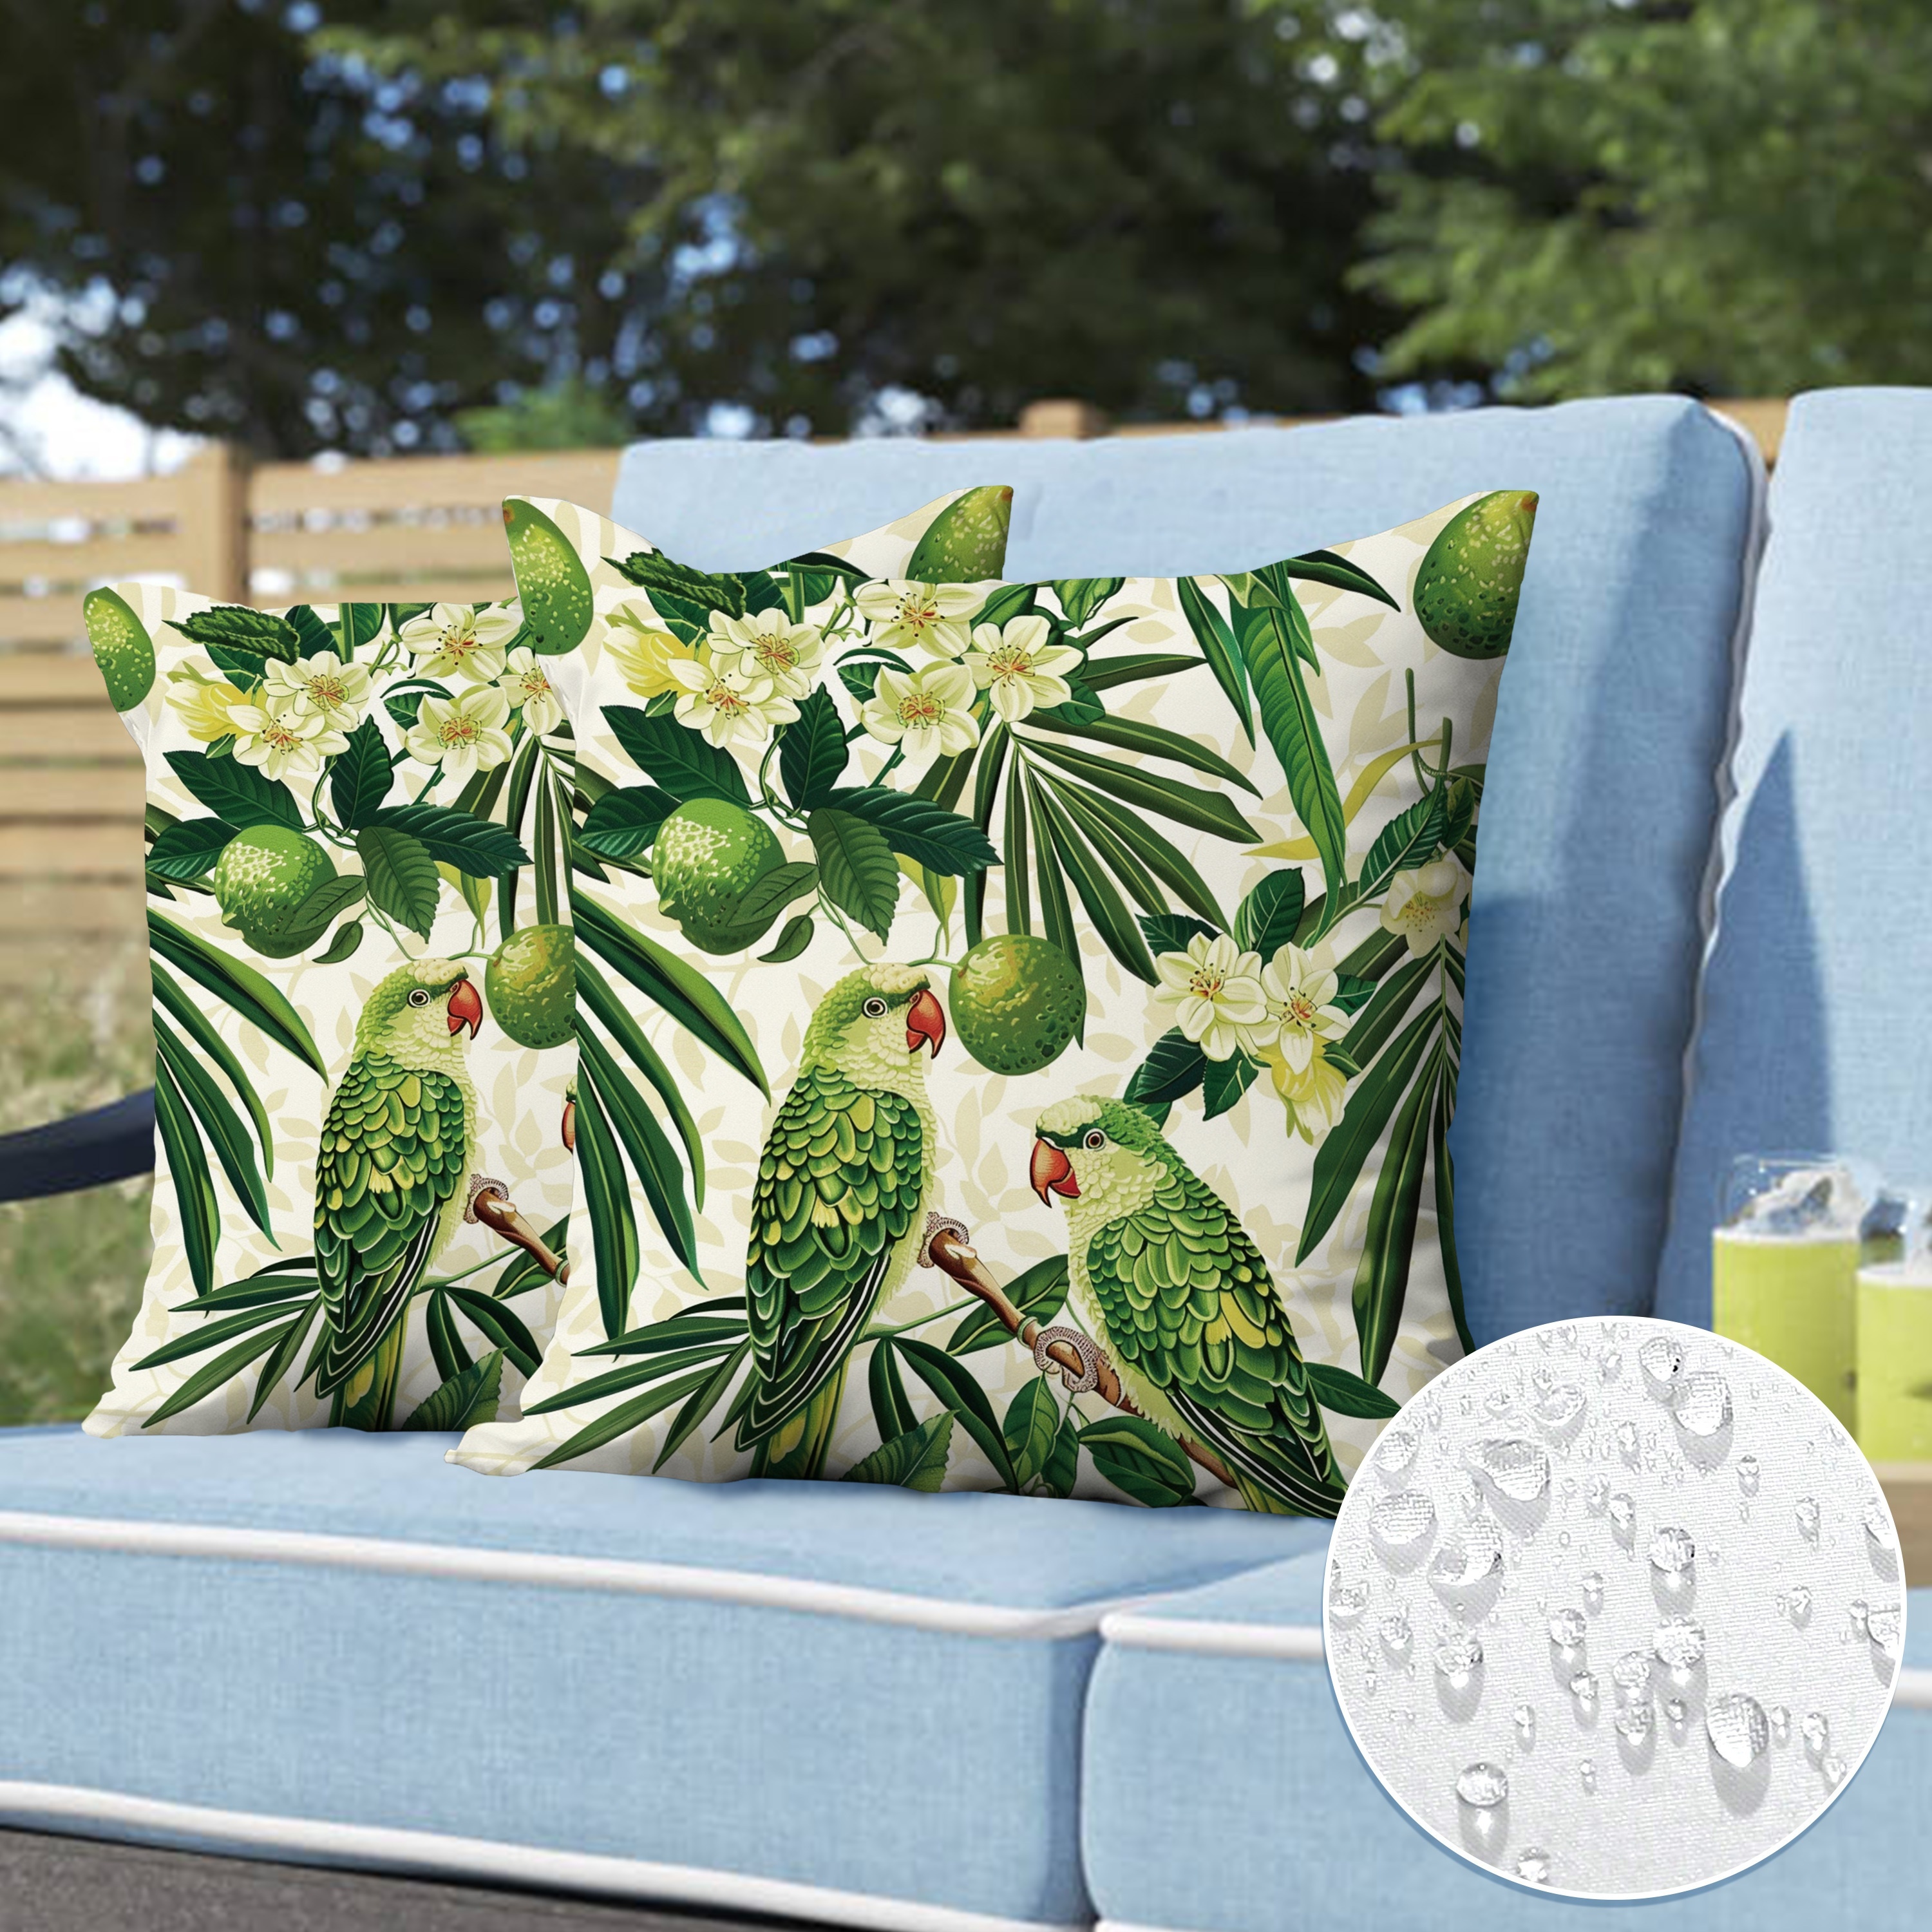 

2pcs, Waterproof Twill Outdoor Throw Pillow Covers, Rustic Parrot Leaf Floral Green Outdoor Throw Pillow Covers 18*18 Inch, For Patio Garden Deck Outdoor Furniture Swing Deep Seat Bed Sofa Decoration